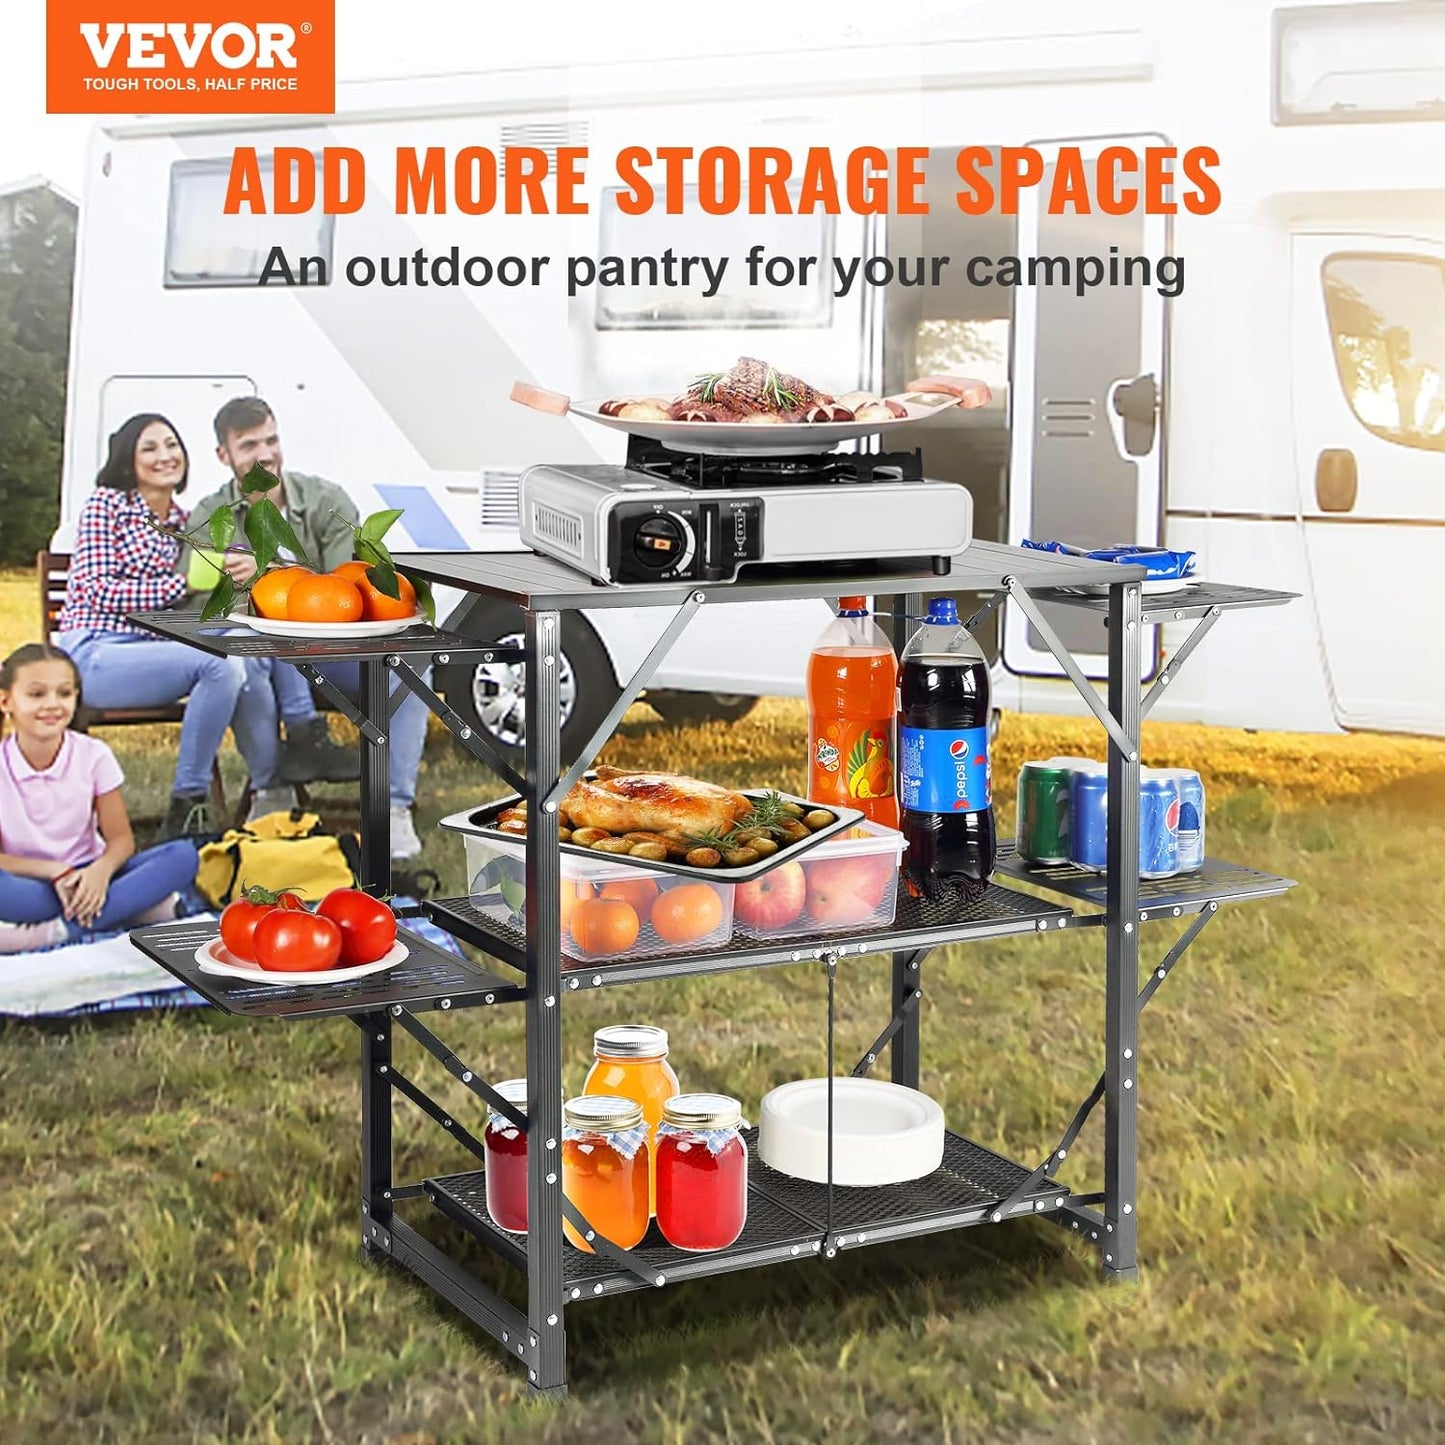 VEVOR Camping Kitchen Table, Aluminum Folding Portable Outdoor Cook Station with 4 Iron Side, 2 Shelves & Carrying Bag, Quick Installation for Picnic BBQ Beach Traveling